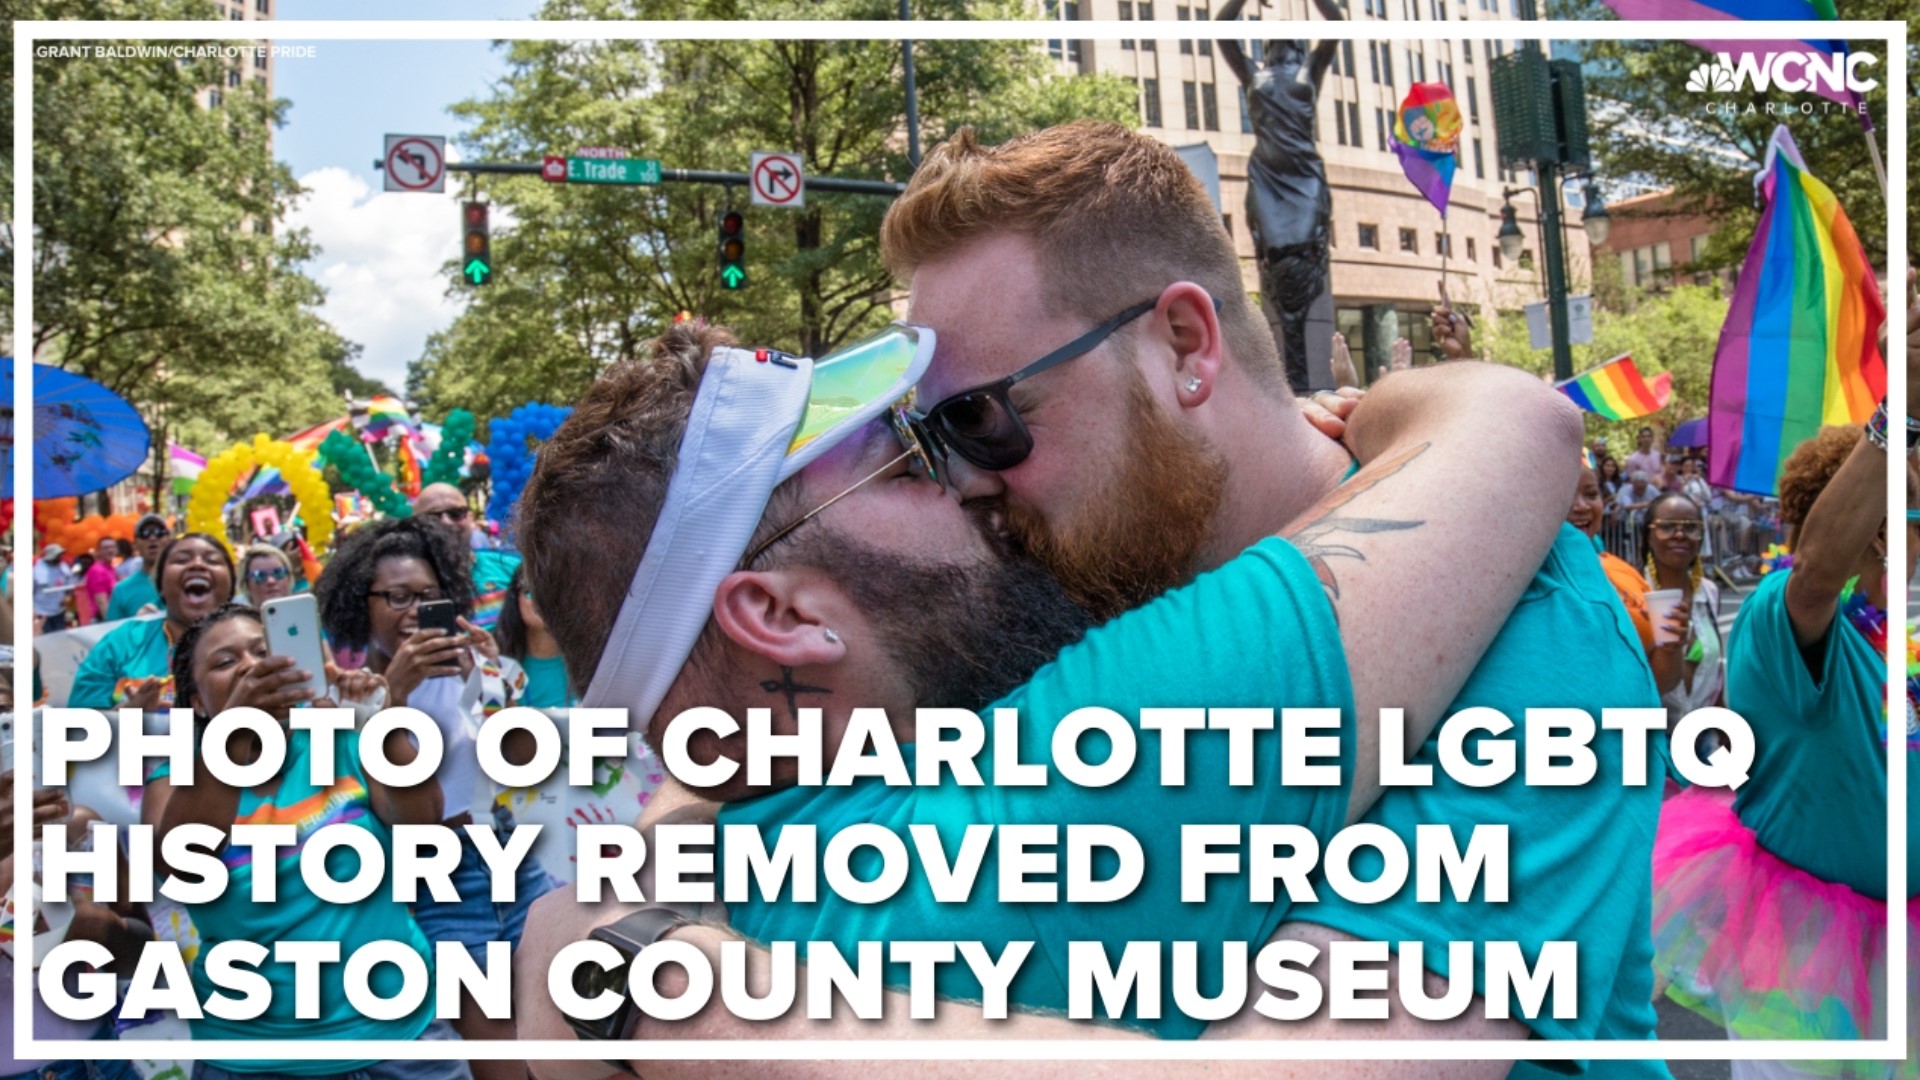 An exhibit highlighting photography will be without a photo taken during a Charlotte Pride event after a decision from the Gaston County manager.